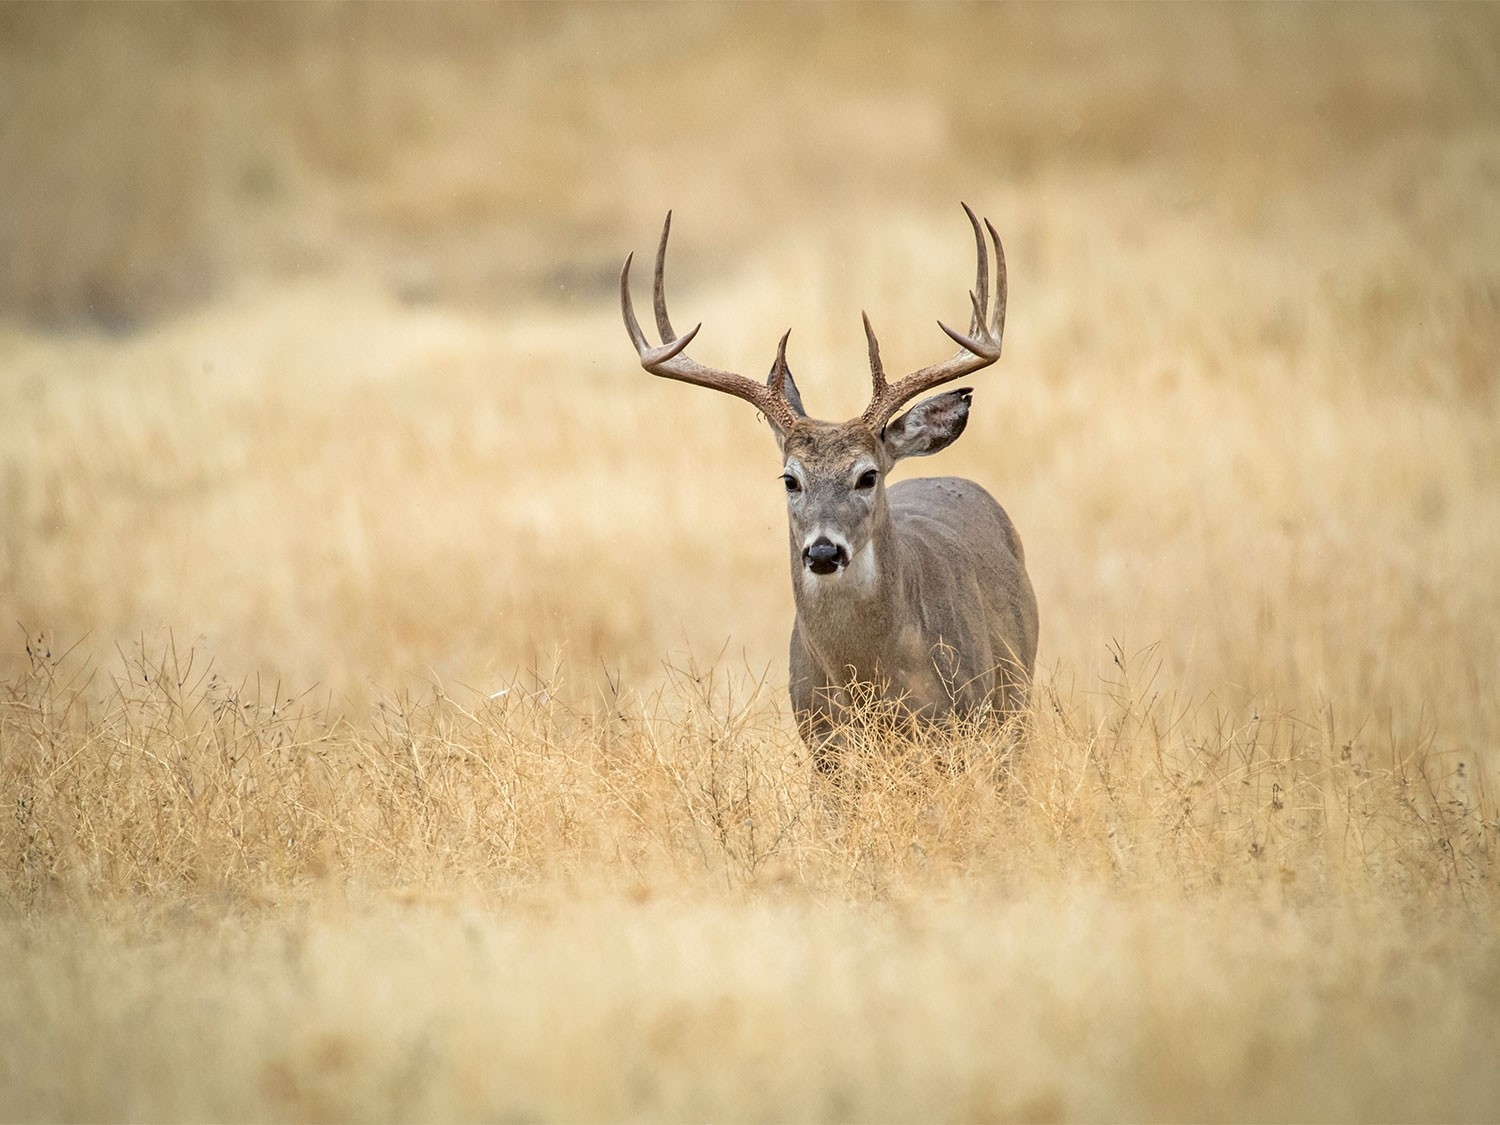 The 7 Best Days Of The 2020 Whitetail Deer Rut | Field &amp; Stream-White Tail Deer Rutt Nc 2021